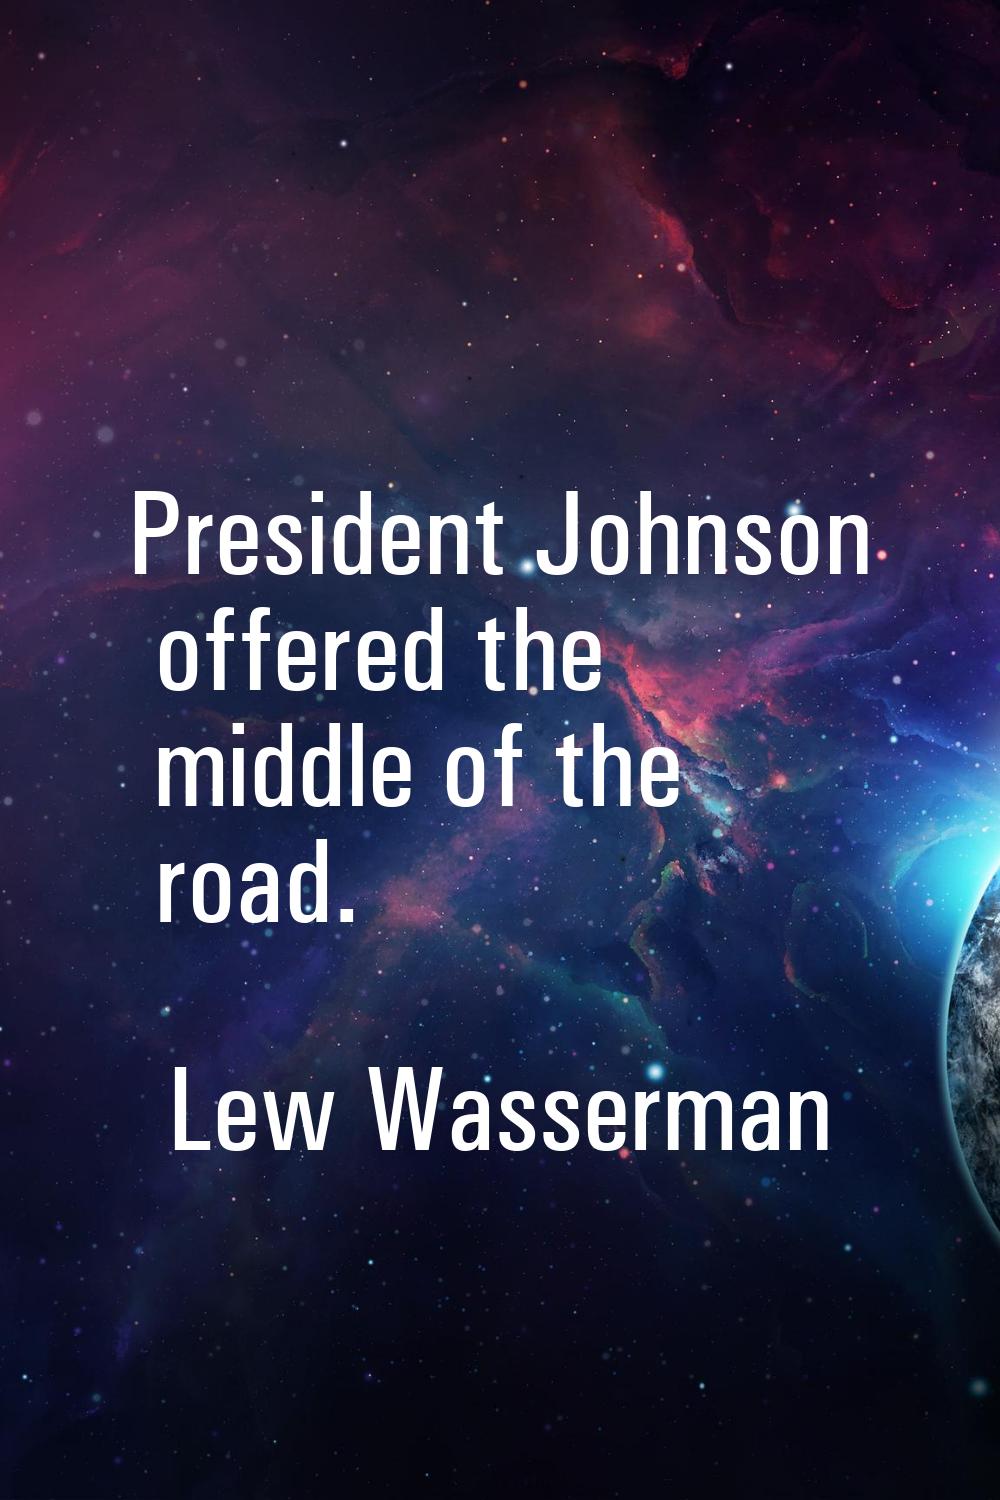 President Johnson offered the middle of the road.